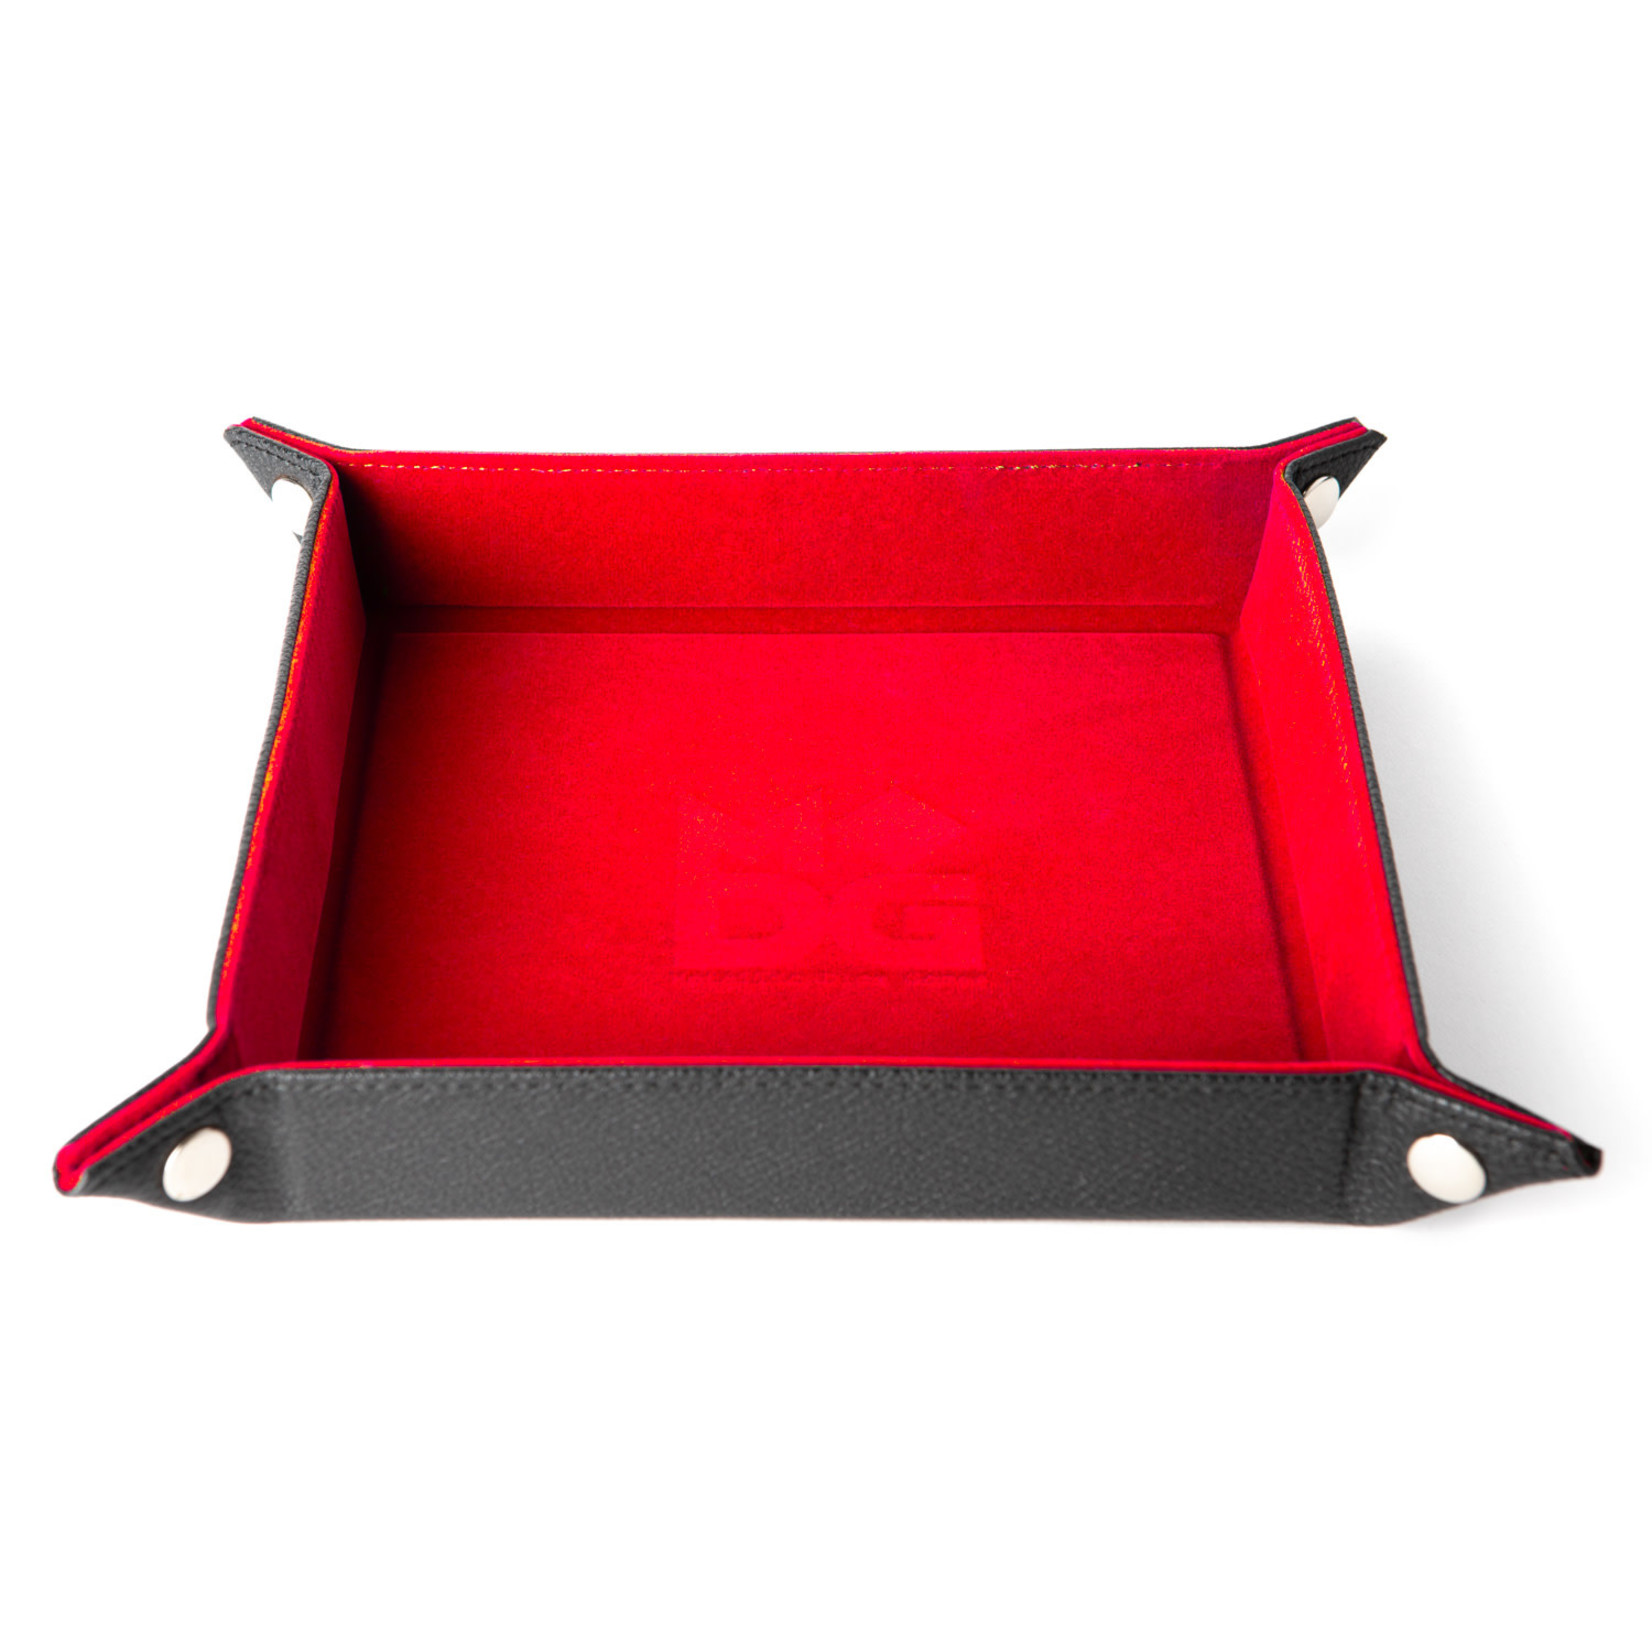 Dice Tray: Red Velvet With Leather Backing - MDG Folding